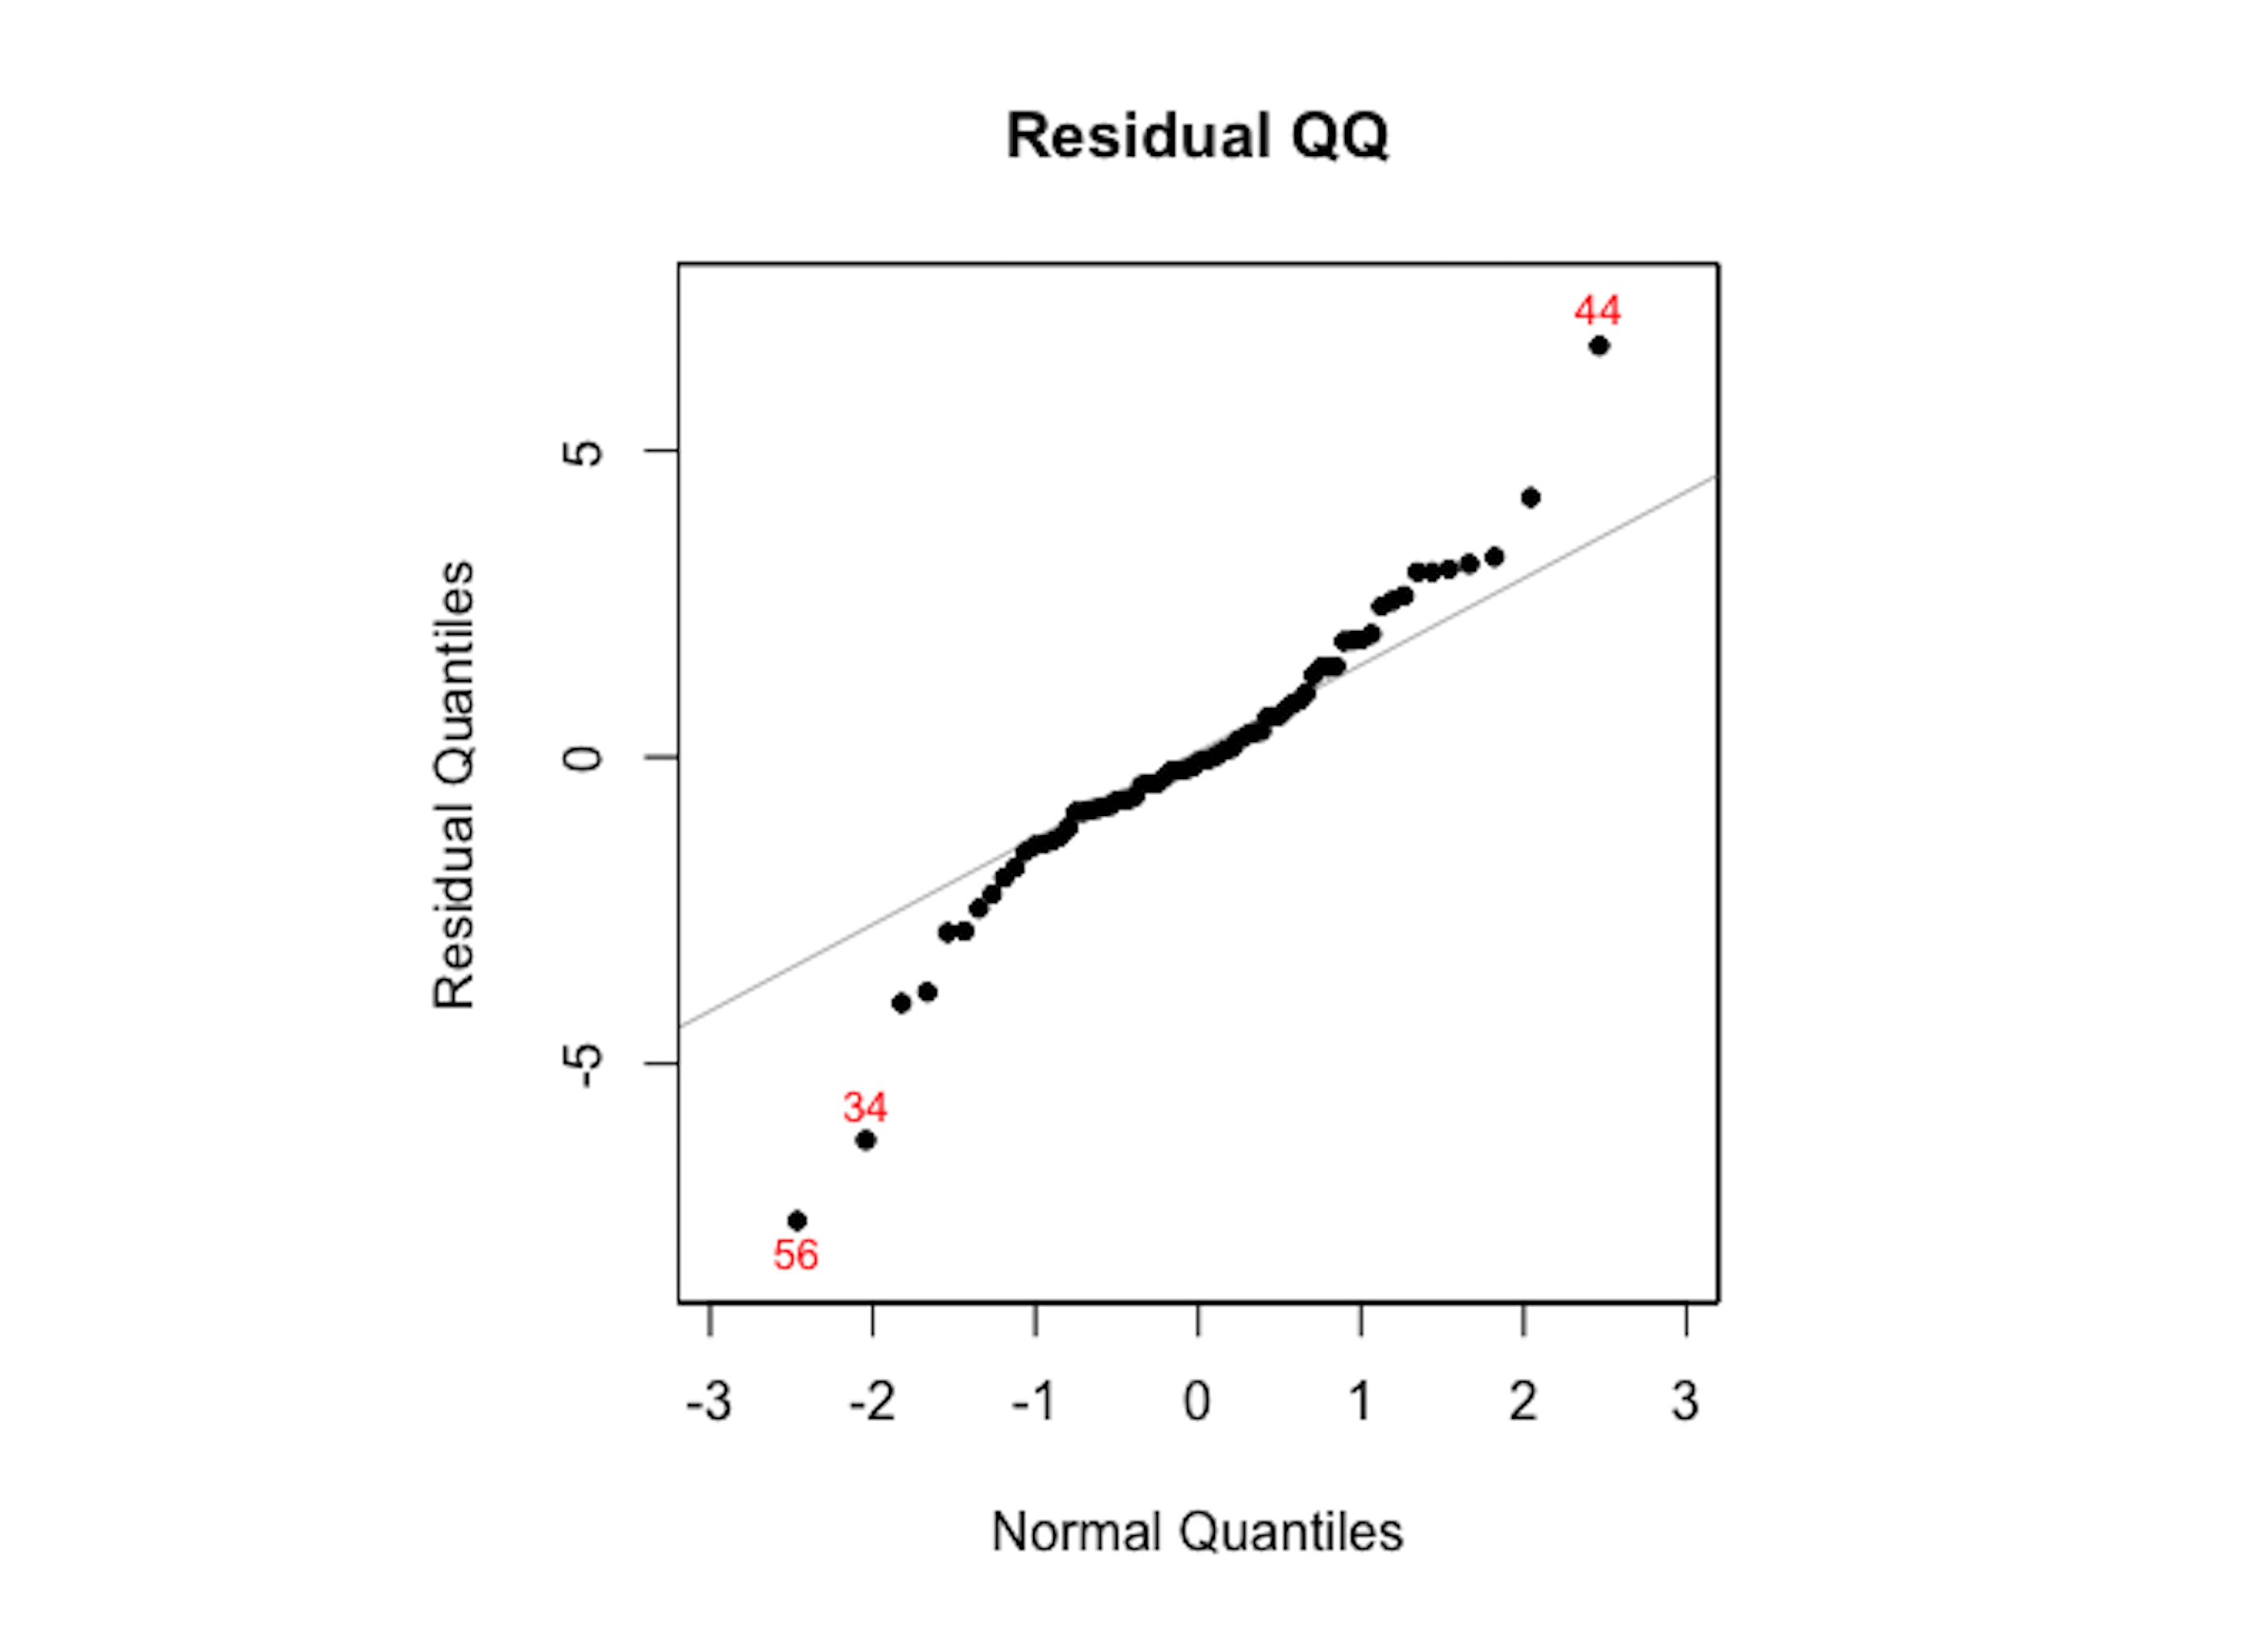 The Q-Q plot of residuals of the random forest model